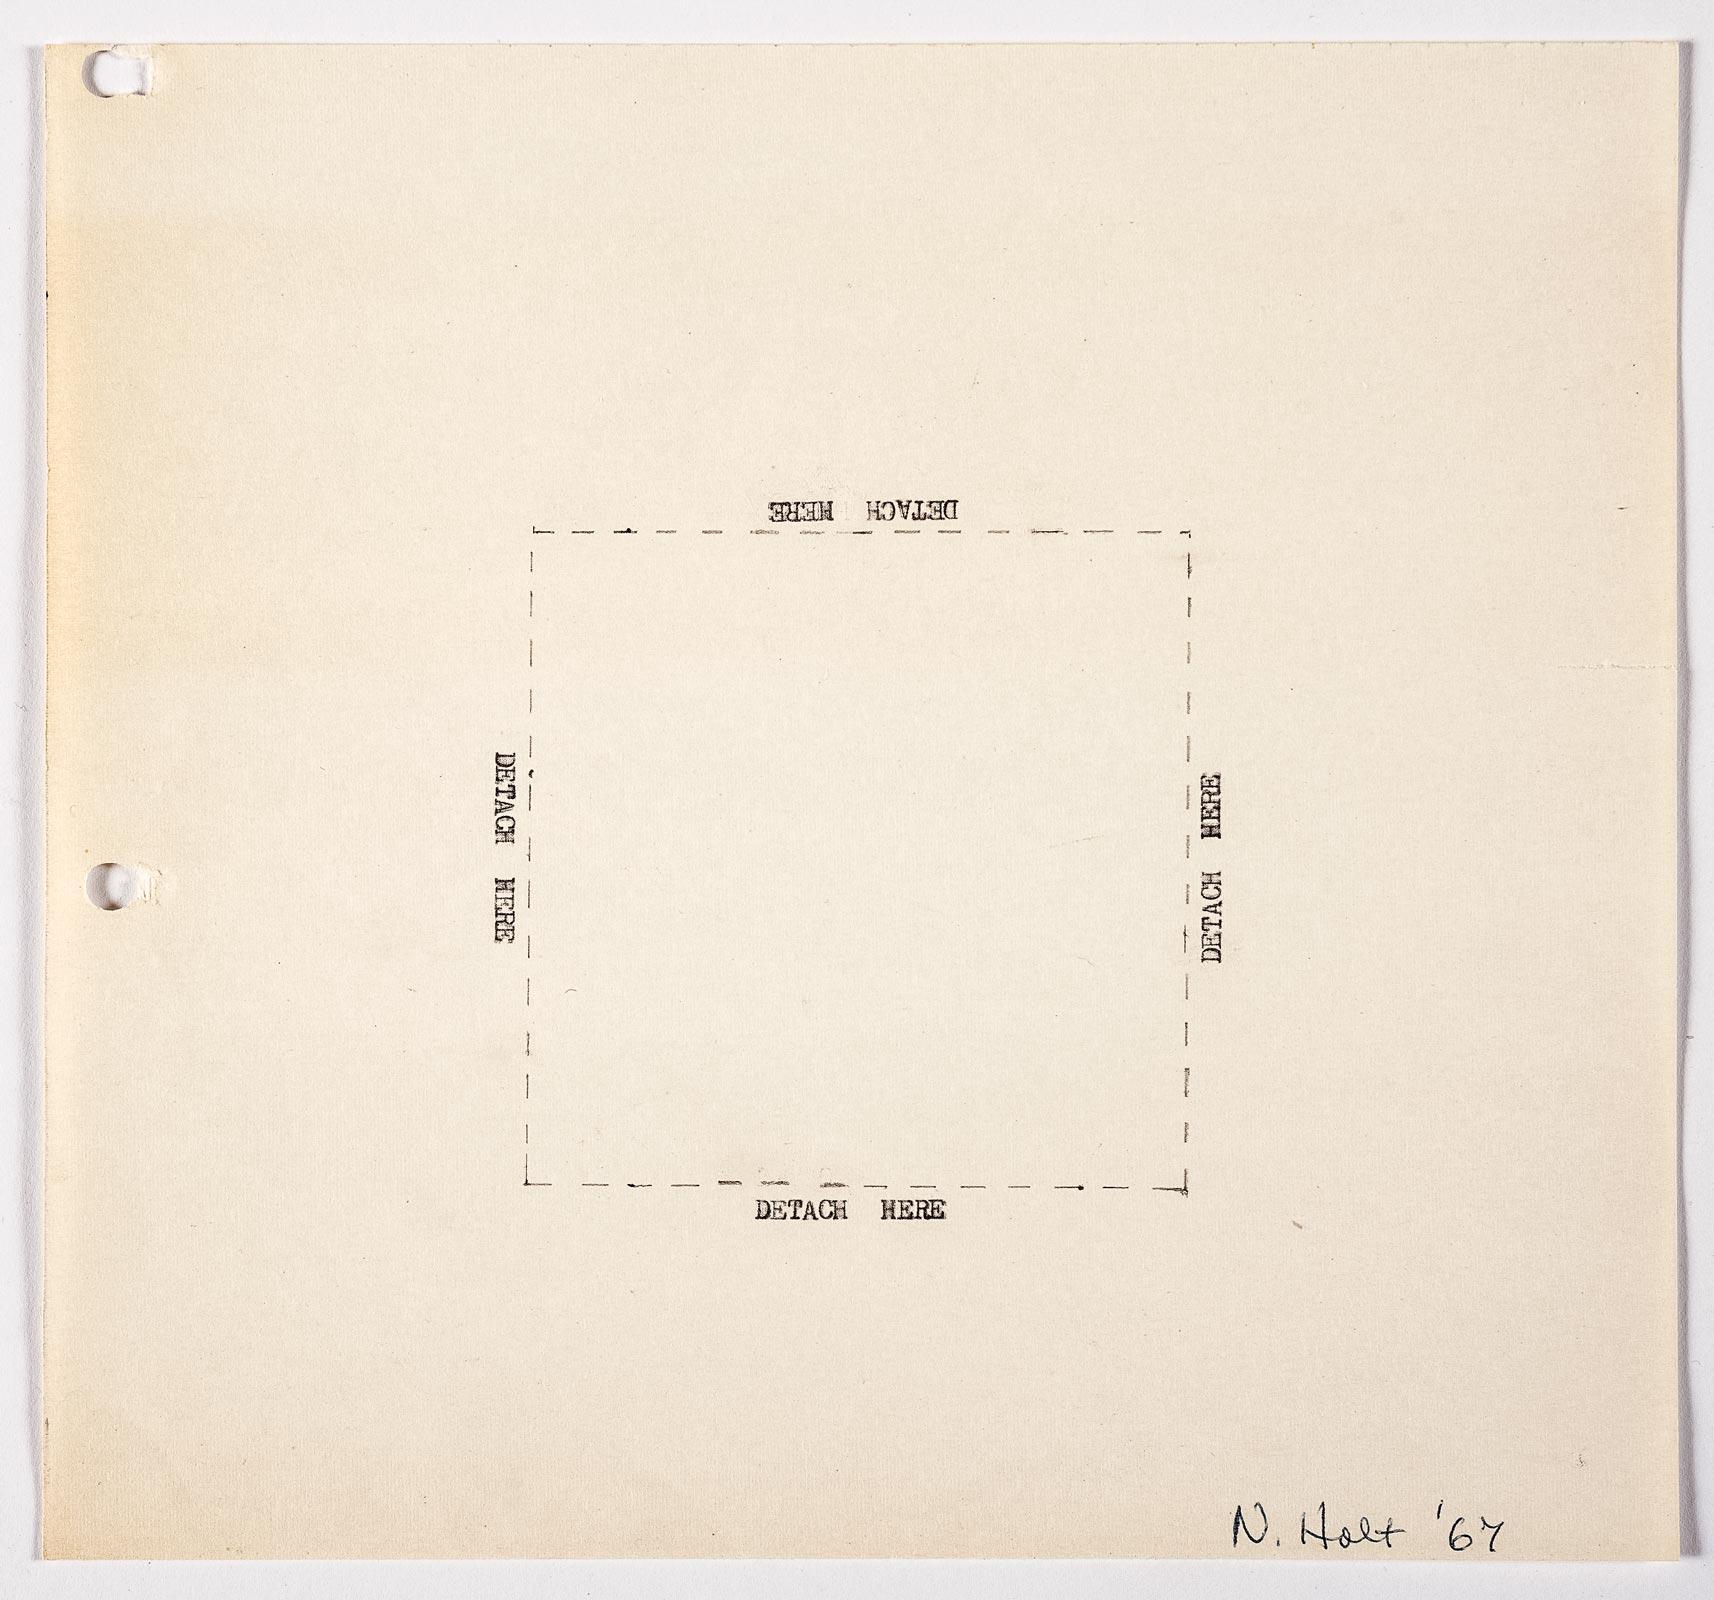 A work done on typewriter with a dashed line forming a square in the middle of the page . Each side of the square has the words "detrach here" typed above them.